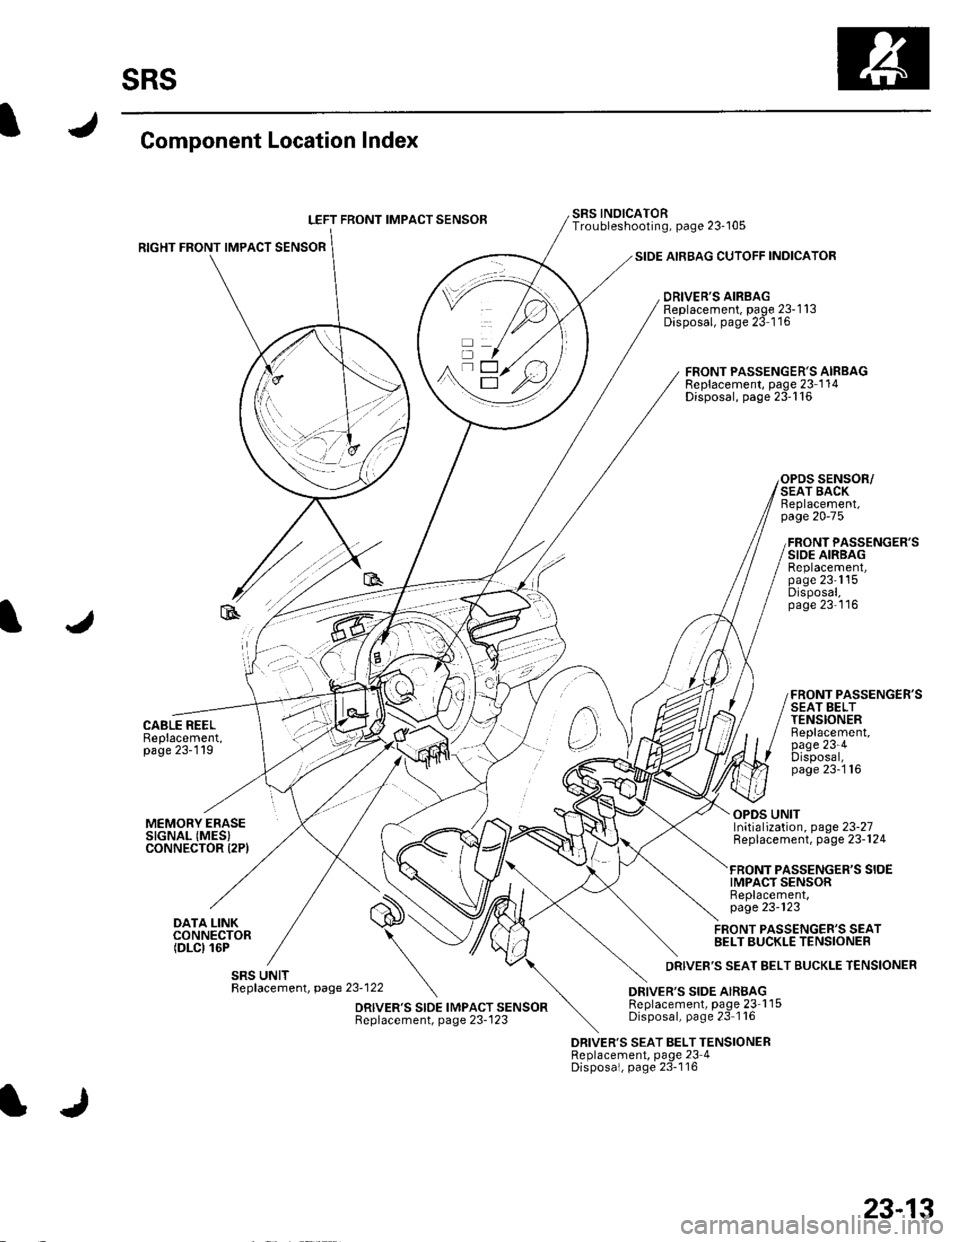 HONDA CIVIC 2002 7.G Workshop Manual sRs
Component Location Index
LEFT FRONT IMPACT SENSOB
RIGHT FRONT IMPACT SENSOR
CABLE REELBeplacement,page 23-119
SIDE AIRBAG CUTOFF INDICATOR
DRIVERS AIRBAGReplacement, page 23-1 13Disposal, page 23